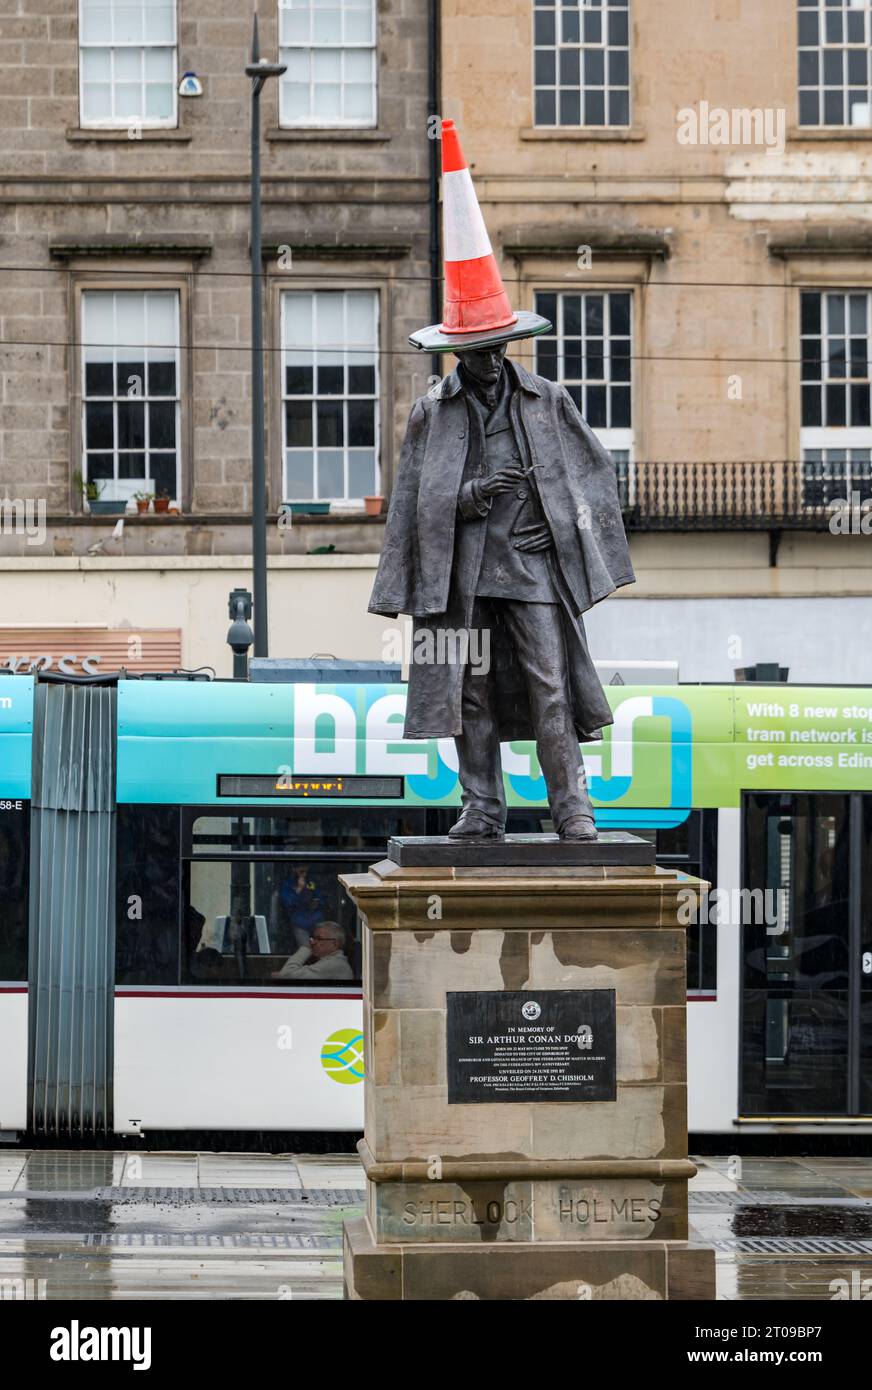 Picardy Place, Edinburgh, Scotland, UK. Sherlock Holmes statue with traffic cone: the newly refurbished and reinstalled statue has a traffic cone on its head. Credit: Sally Anderson/Alamy Live News Stock Photo